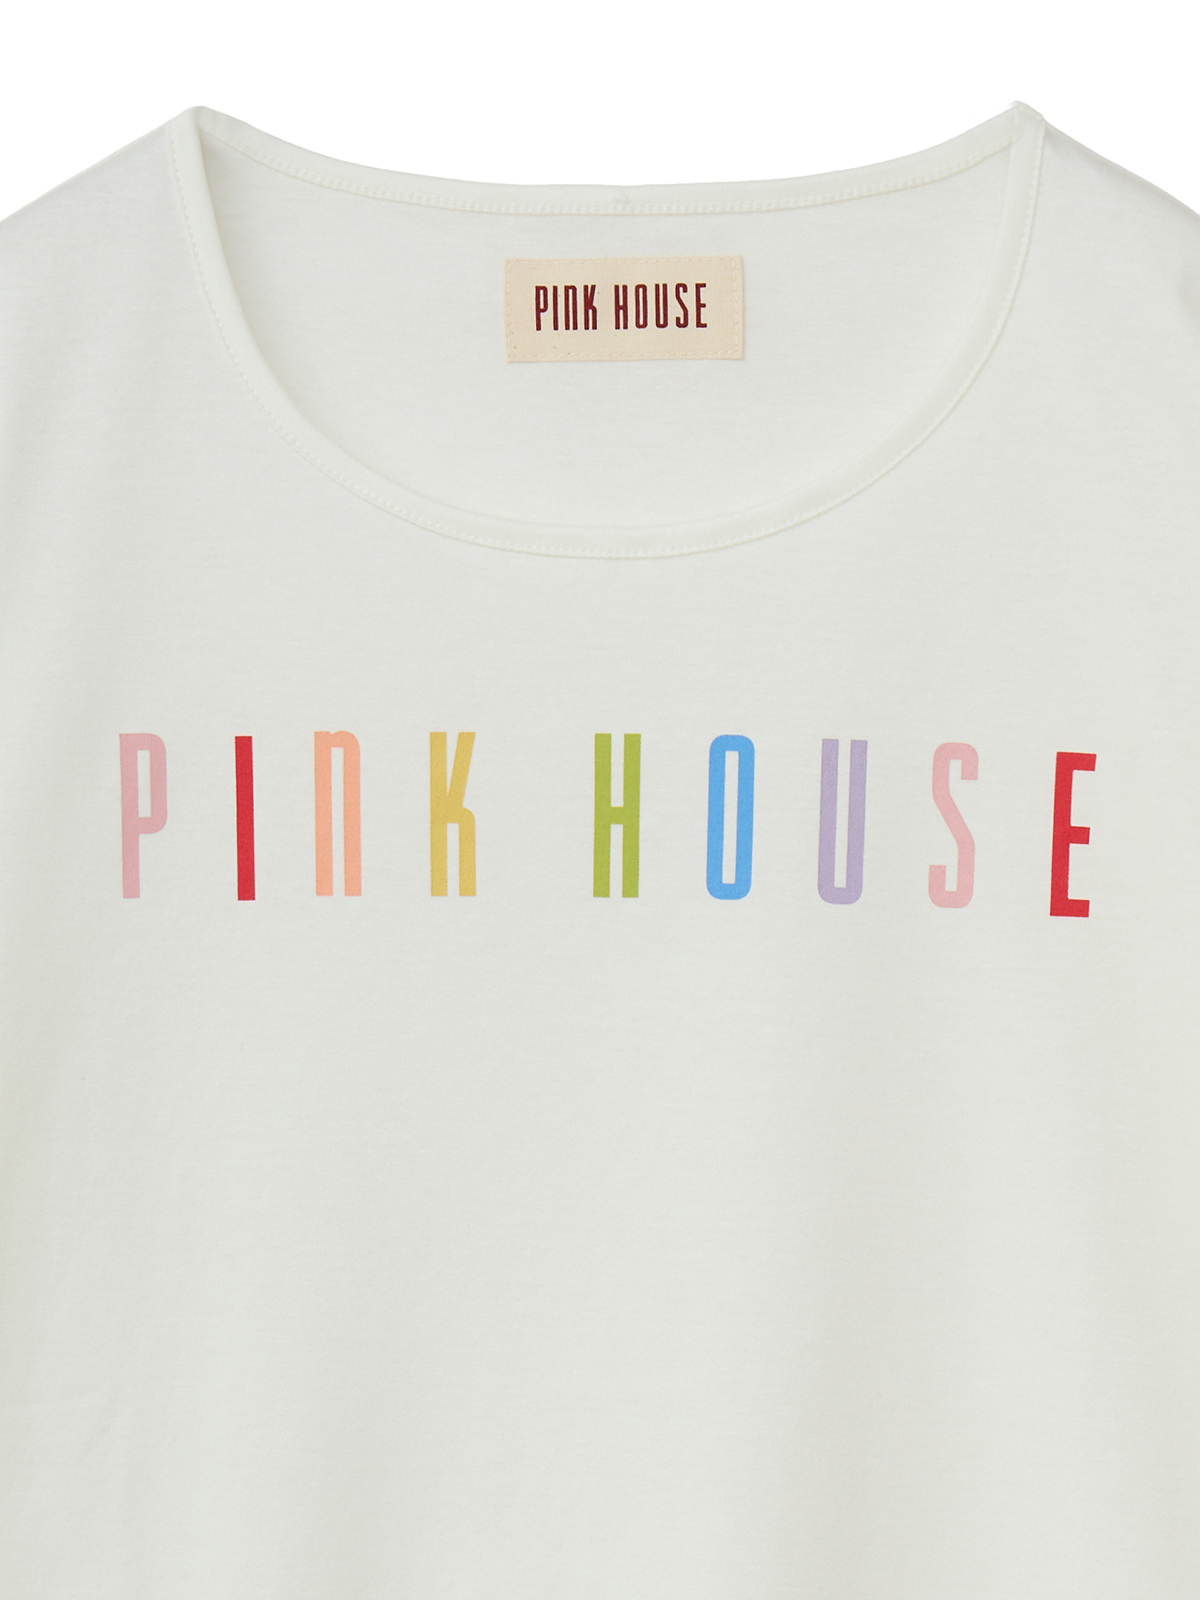 PINKHOUSEカットソー